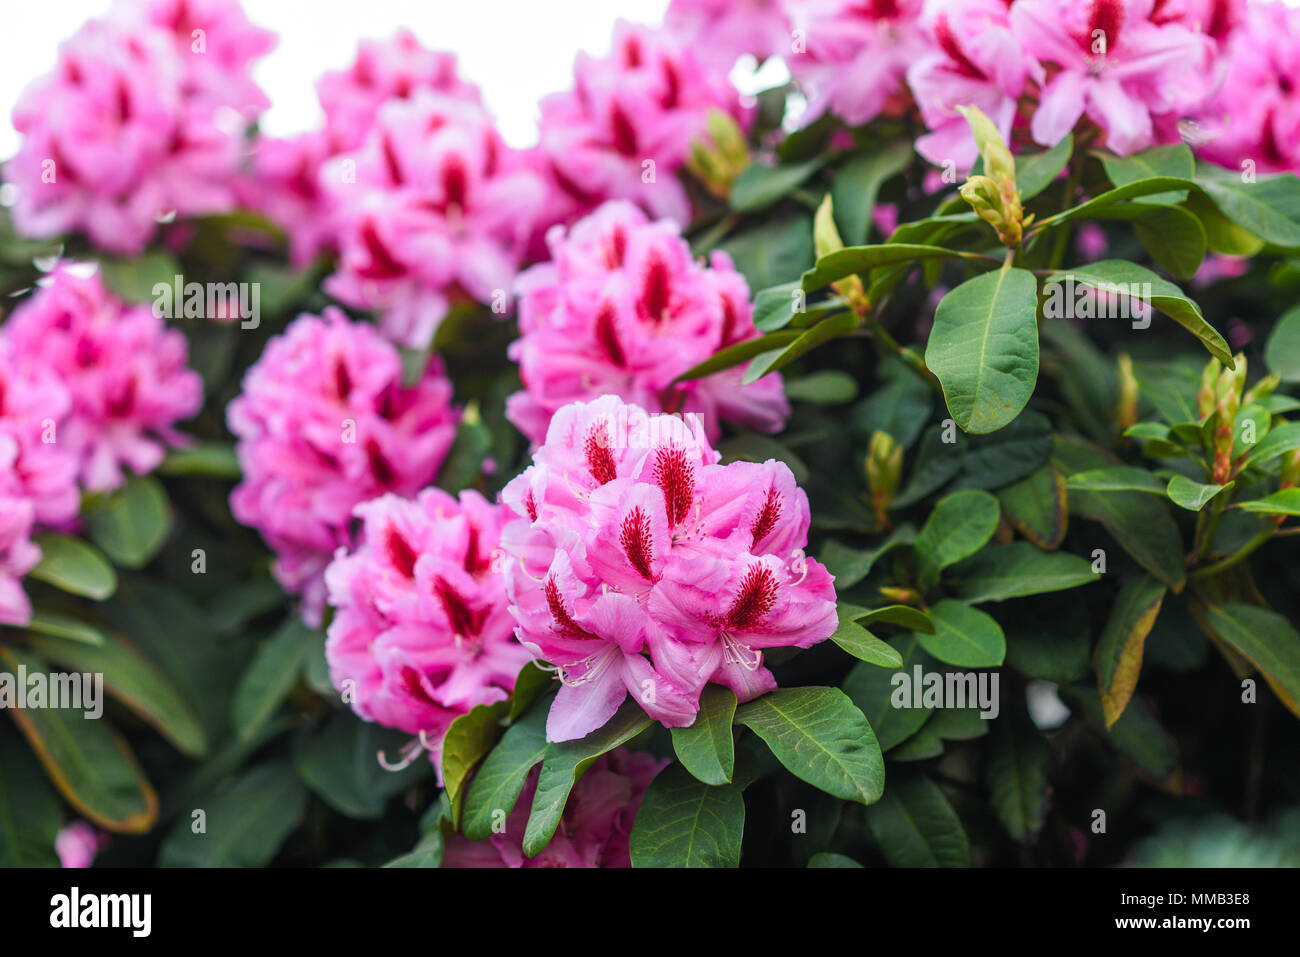 Blooming pink rhododendron flowers during spring. Stock Photo